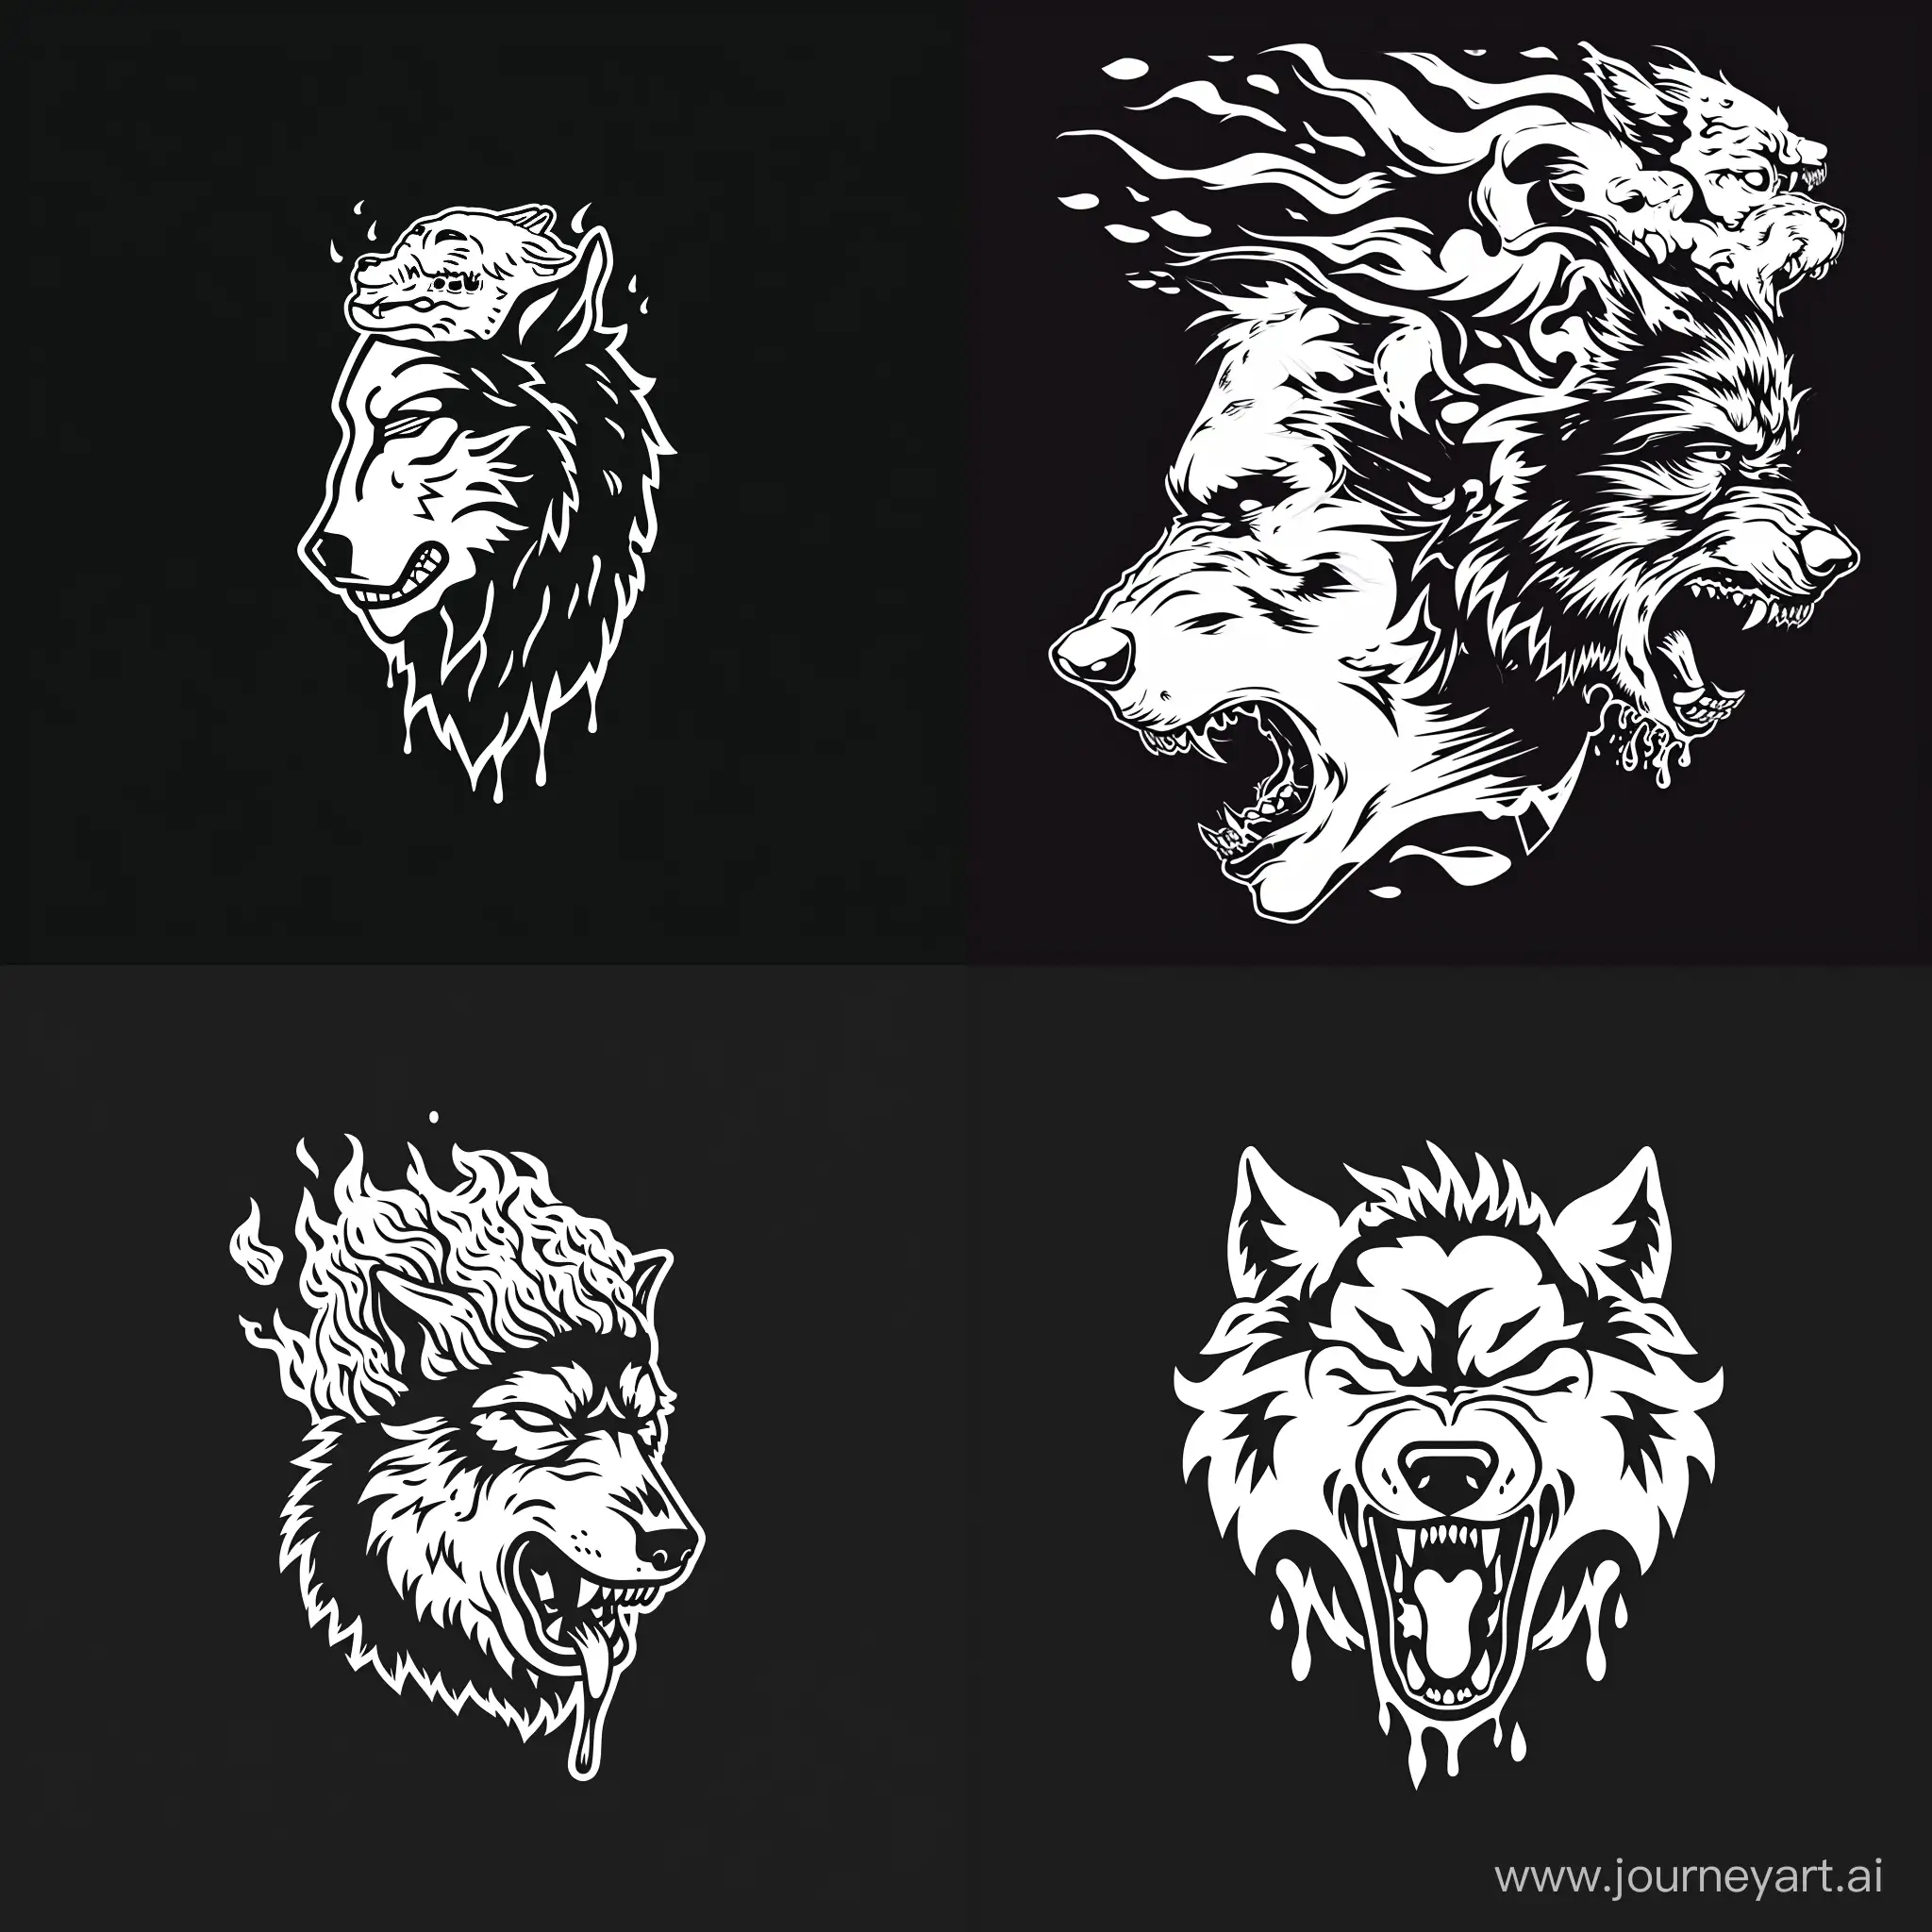 drunk dizzy drunkenness intoxication vomit, wolf,  head and alcohol only logo in black and white